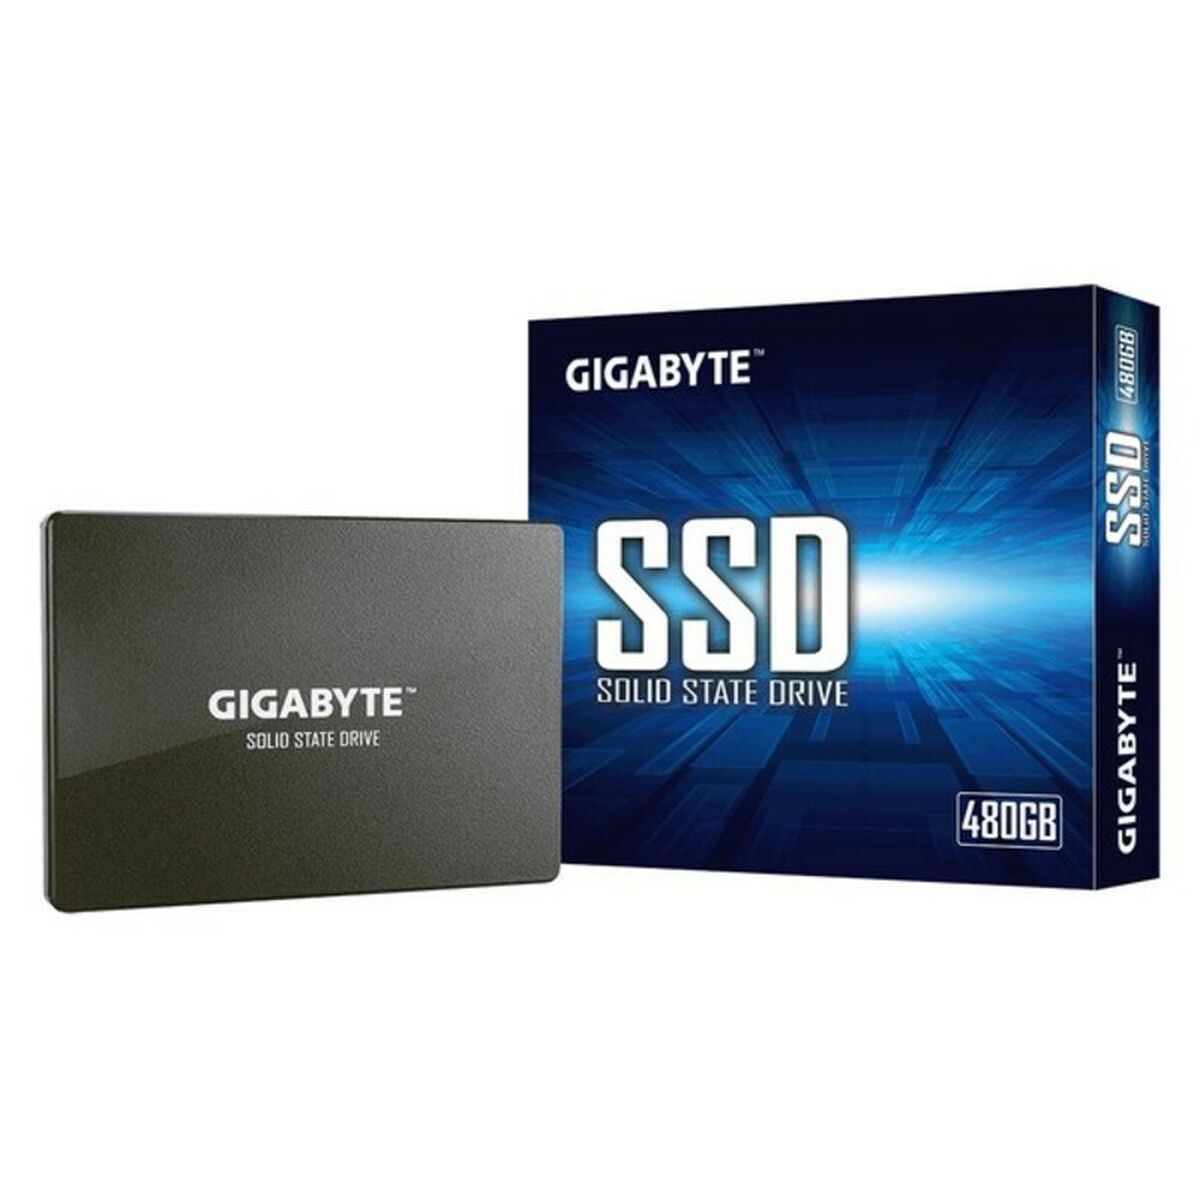 Hard Drive Gigabyte GP-GSTFS3 2,5" SSD 500 MB/s SSD, Gigabyte, Computing, Data storage, hard-drive-gigabyte-gp-gstfs3-2-5-ssd-500-mb-s-ssd, :120 GB, :480 GB, Brand_Gigabyte, Capacity_120 GB, Capacity_240 GB, Capacity_480 GB, category-reference-2609, category-reference-2803, category-reference-2806, category-reference-t-19685, category-reference-t-19909, category-reference-t-21357, computers / components, Condition_NEW, Price_50 - 100, Teleworking, RiotNook